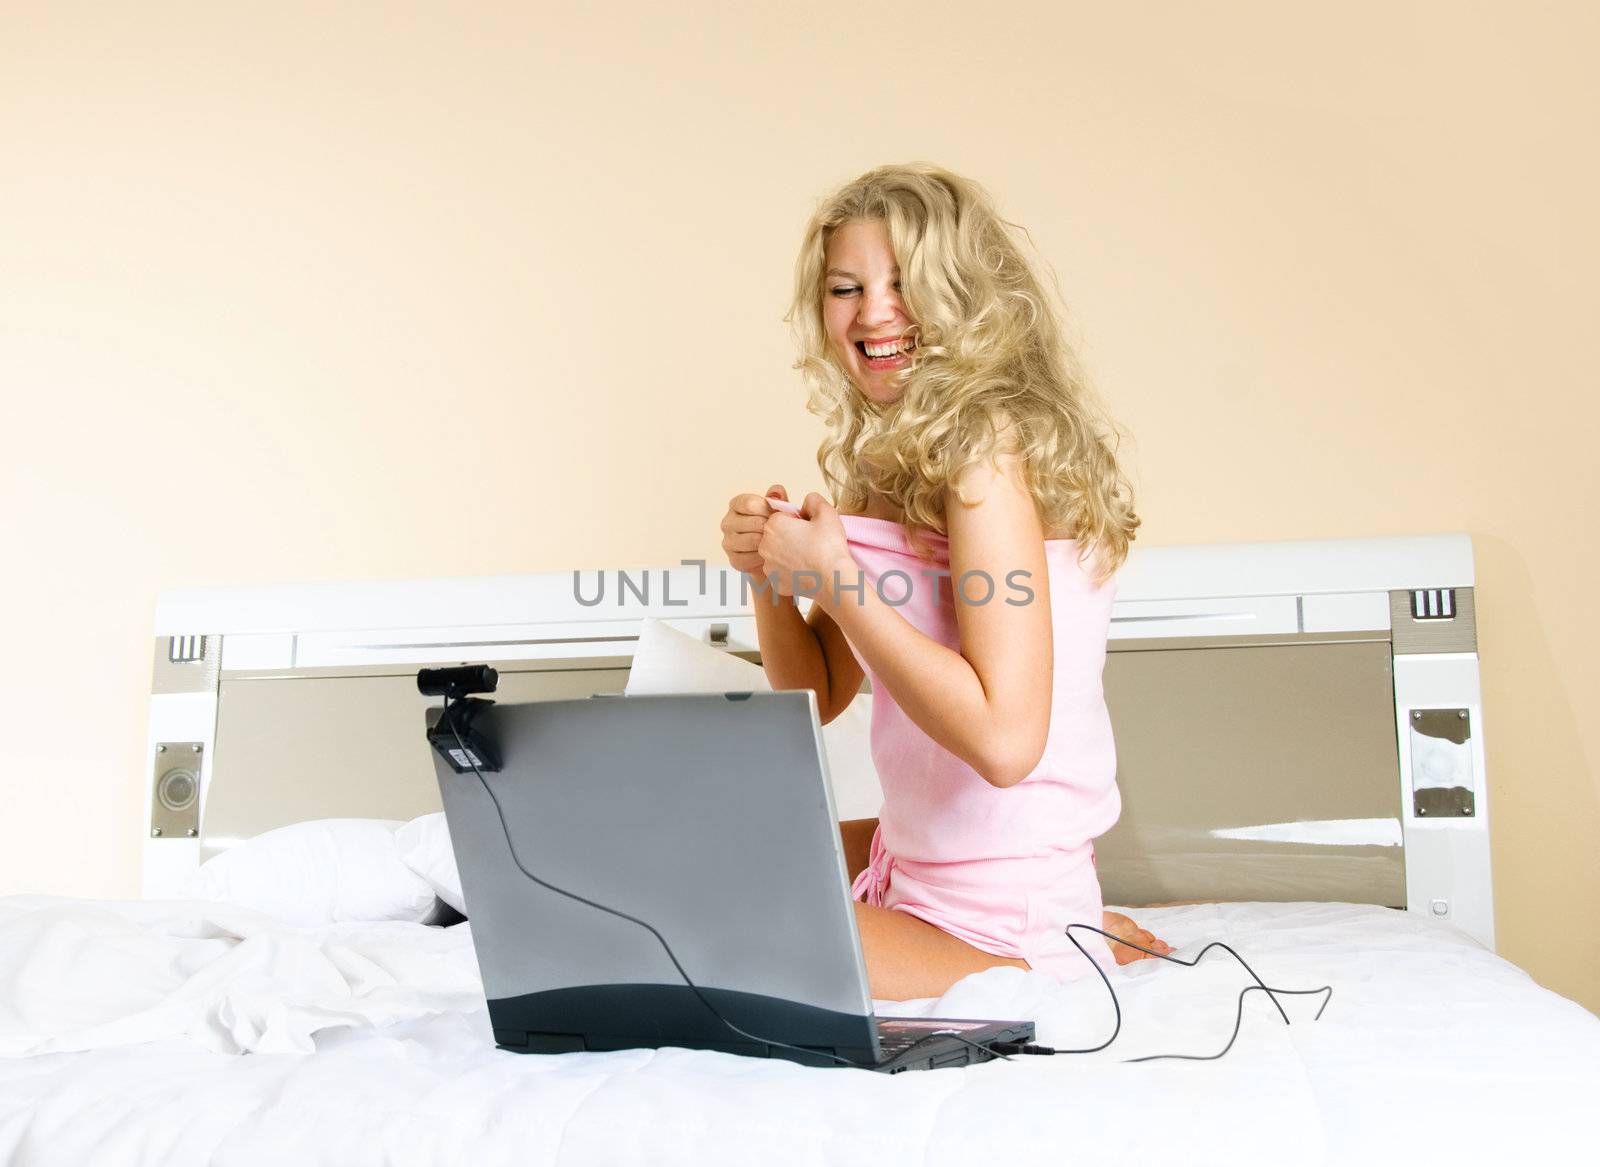 pretty blond woman communicating with her friend using a web camera and laughing